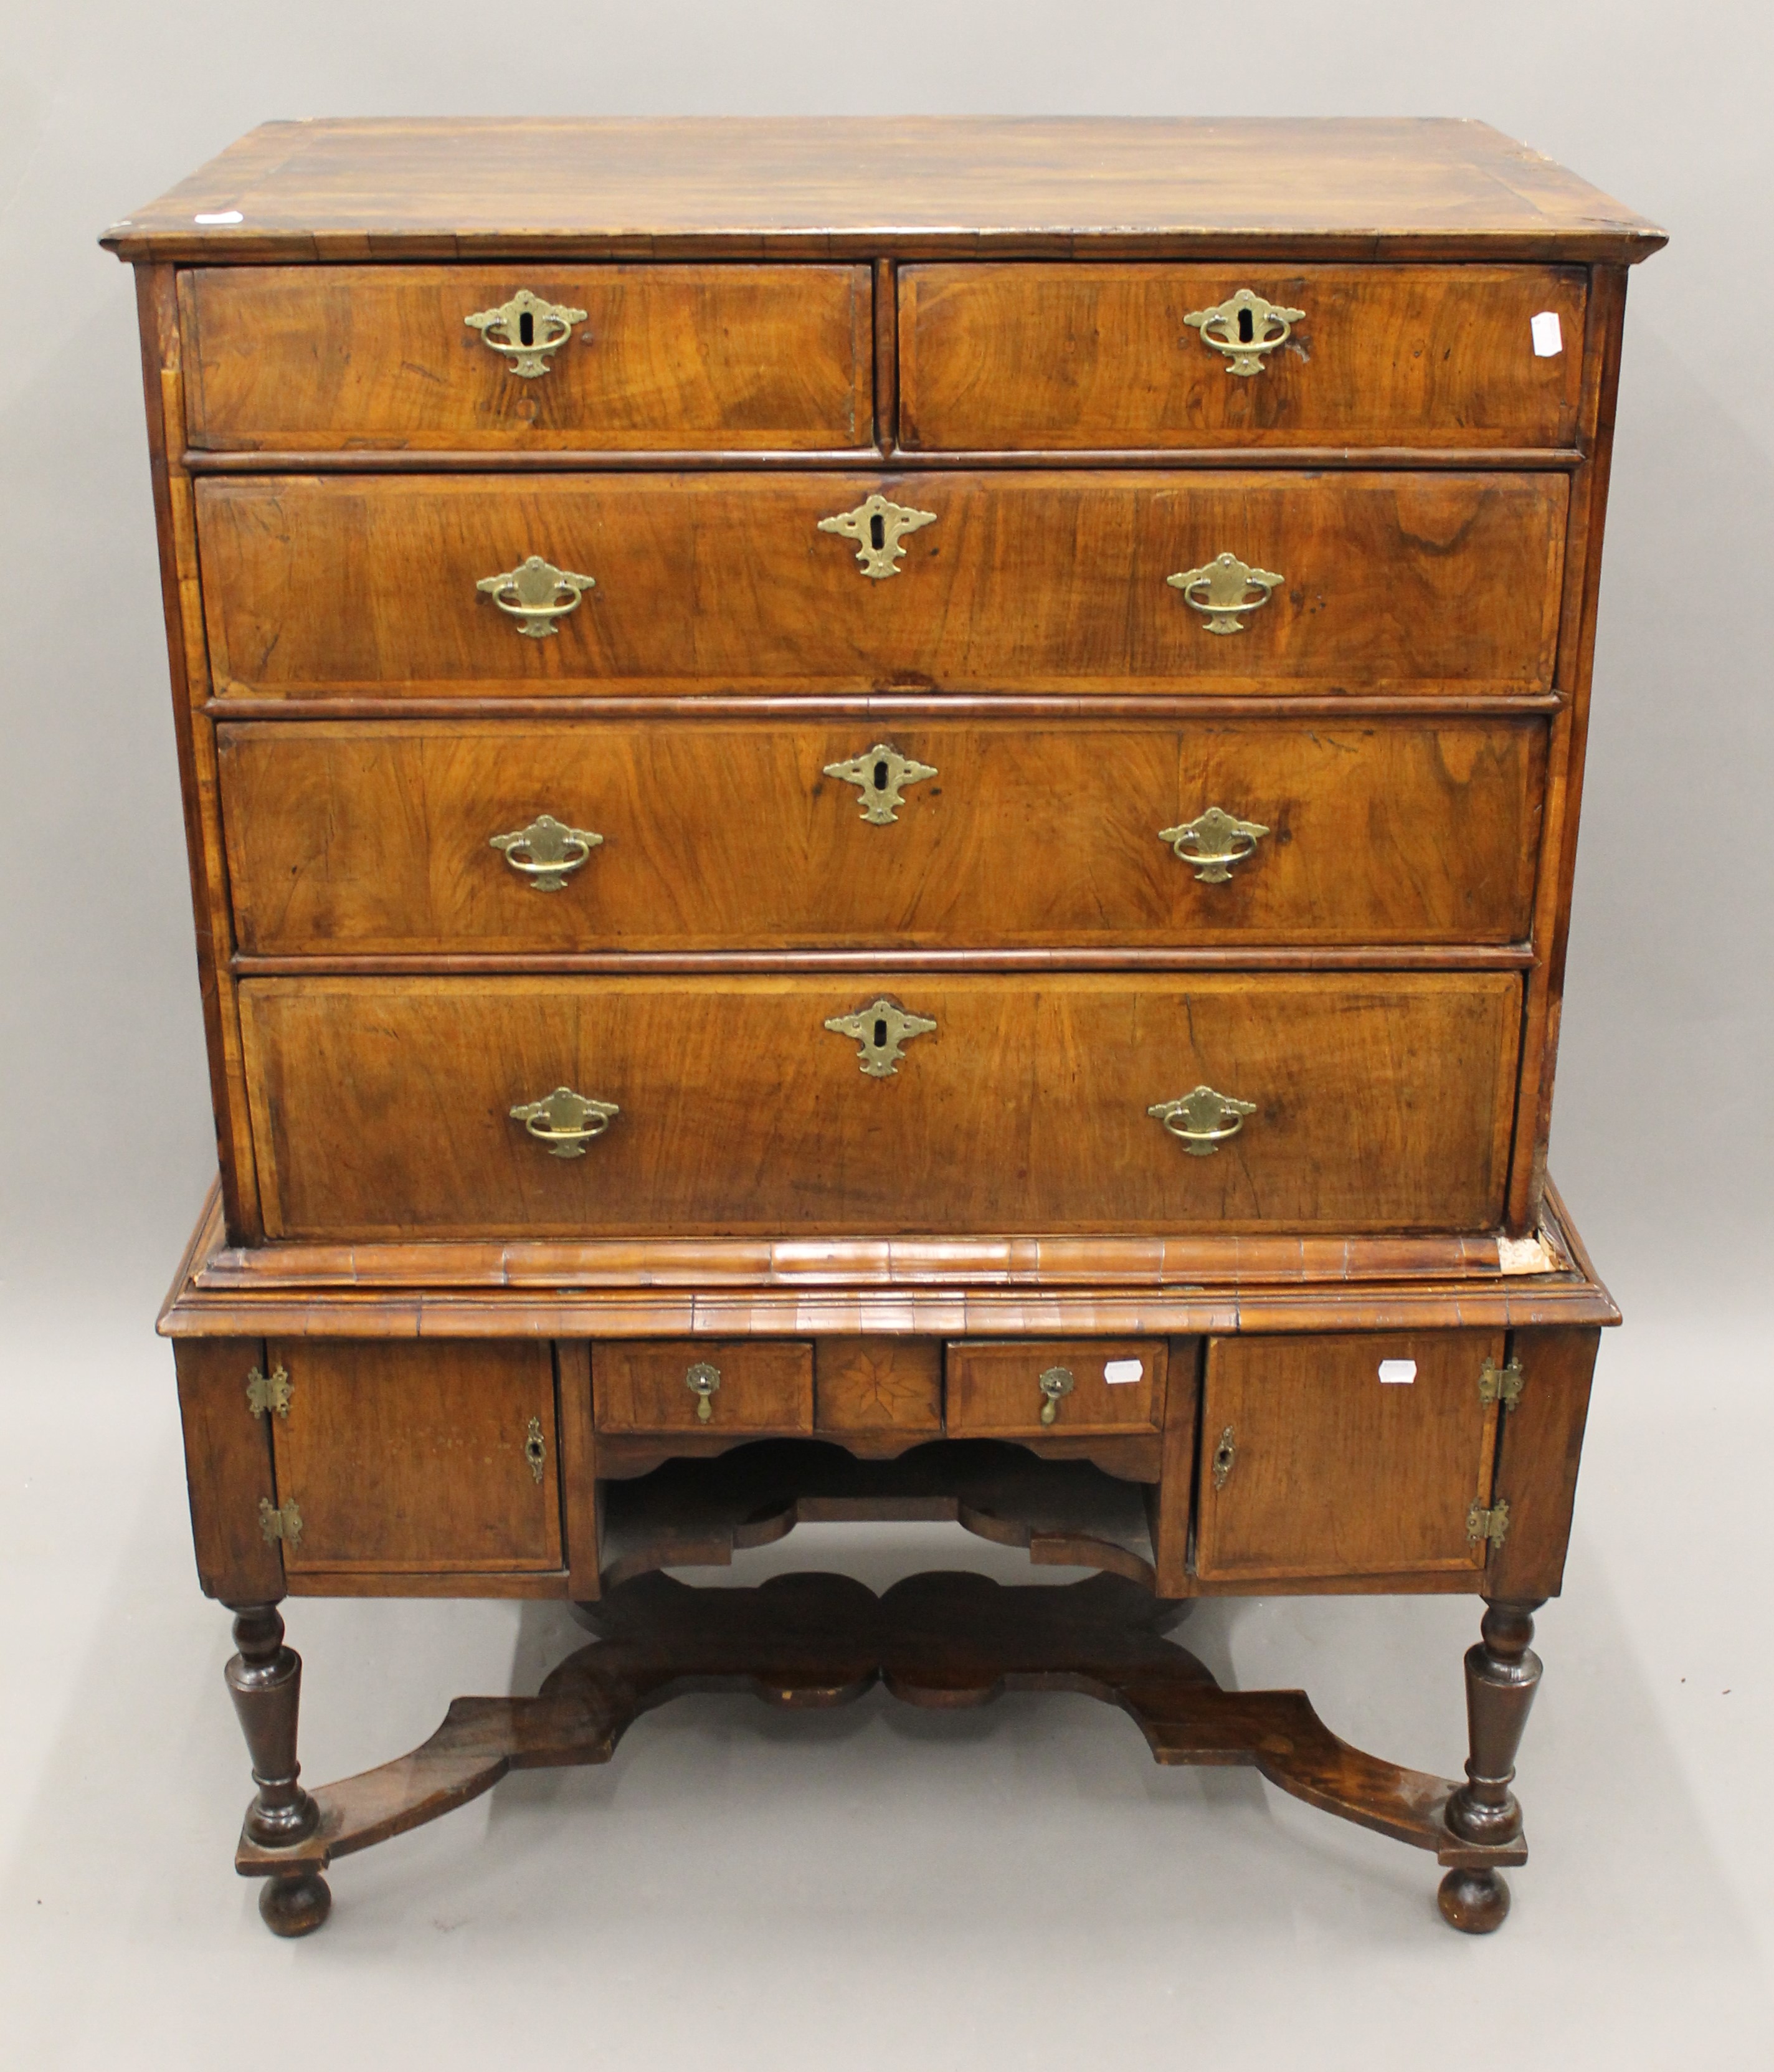 An 18th century walnut chest on stand. 101 cm wide x 129.5 cm high.